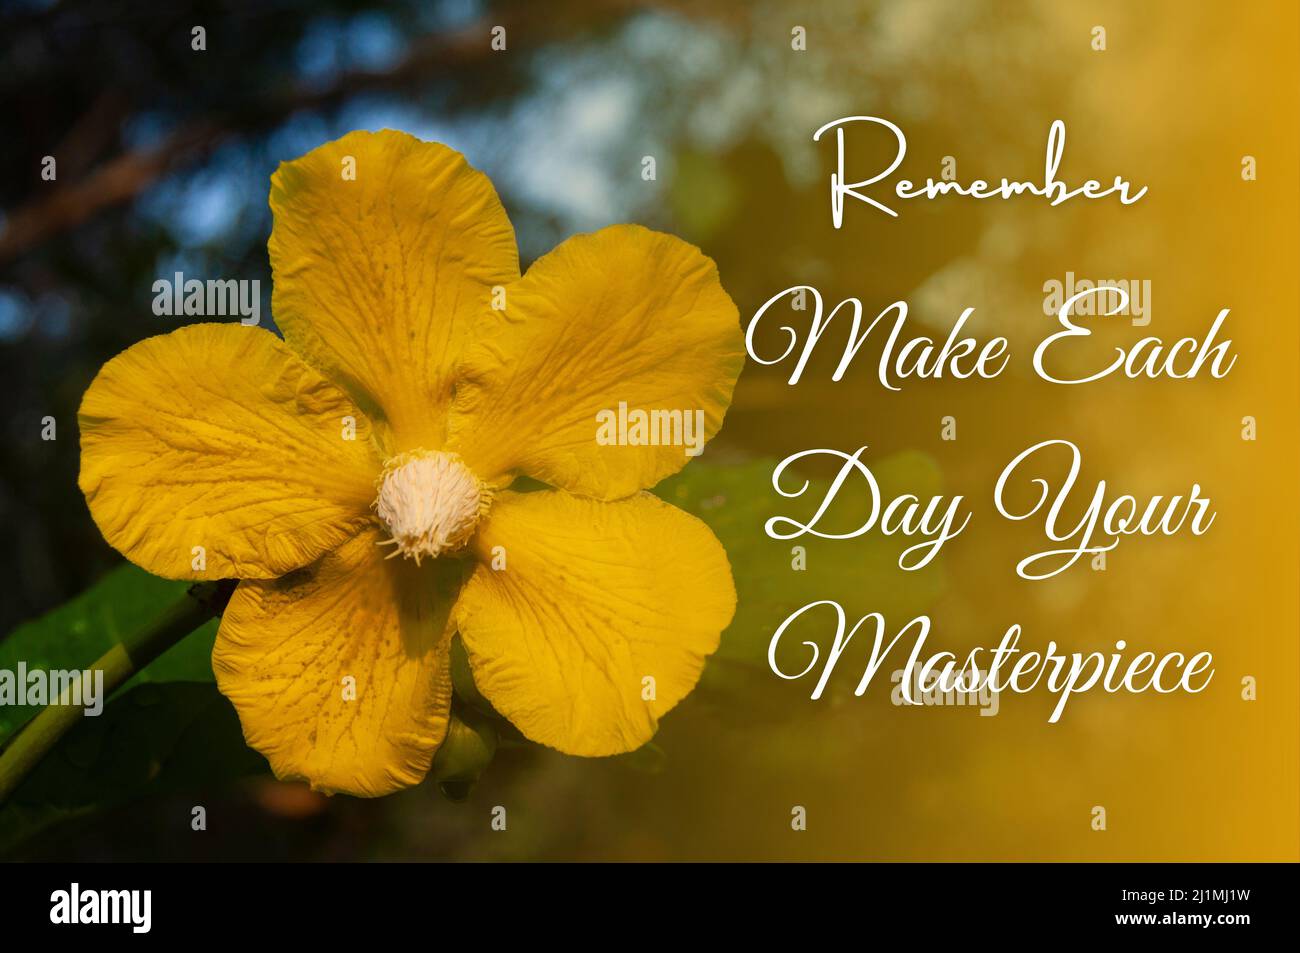 Motivational and inpirational quote -Make each day your masterpiece. With yellow flower and blurred nature background. Motivational concept Stock Photo